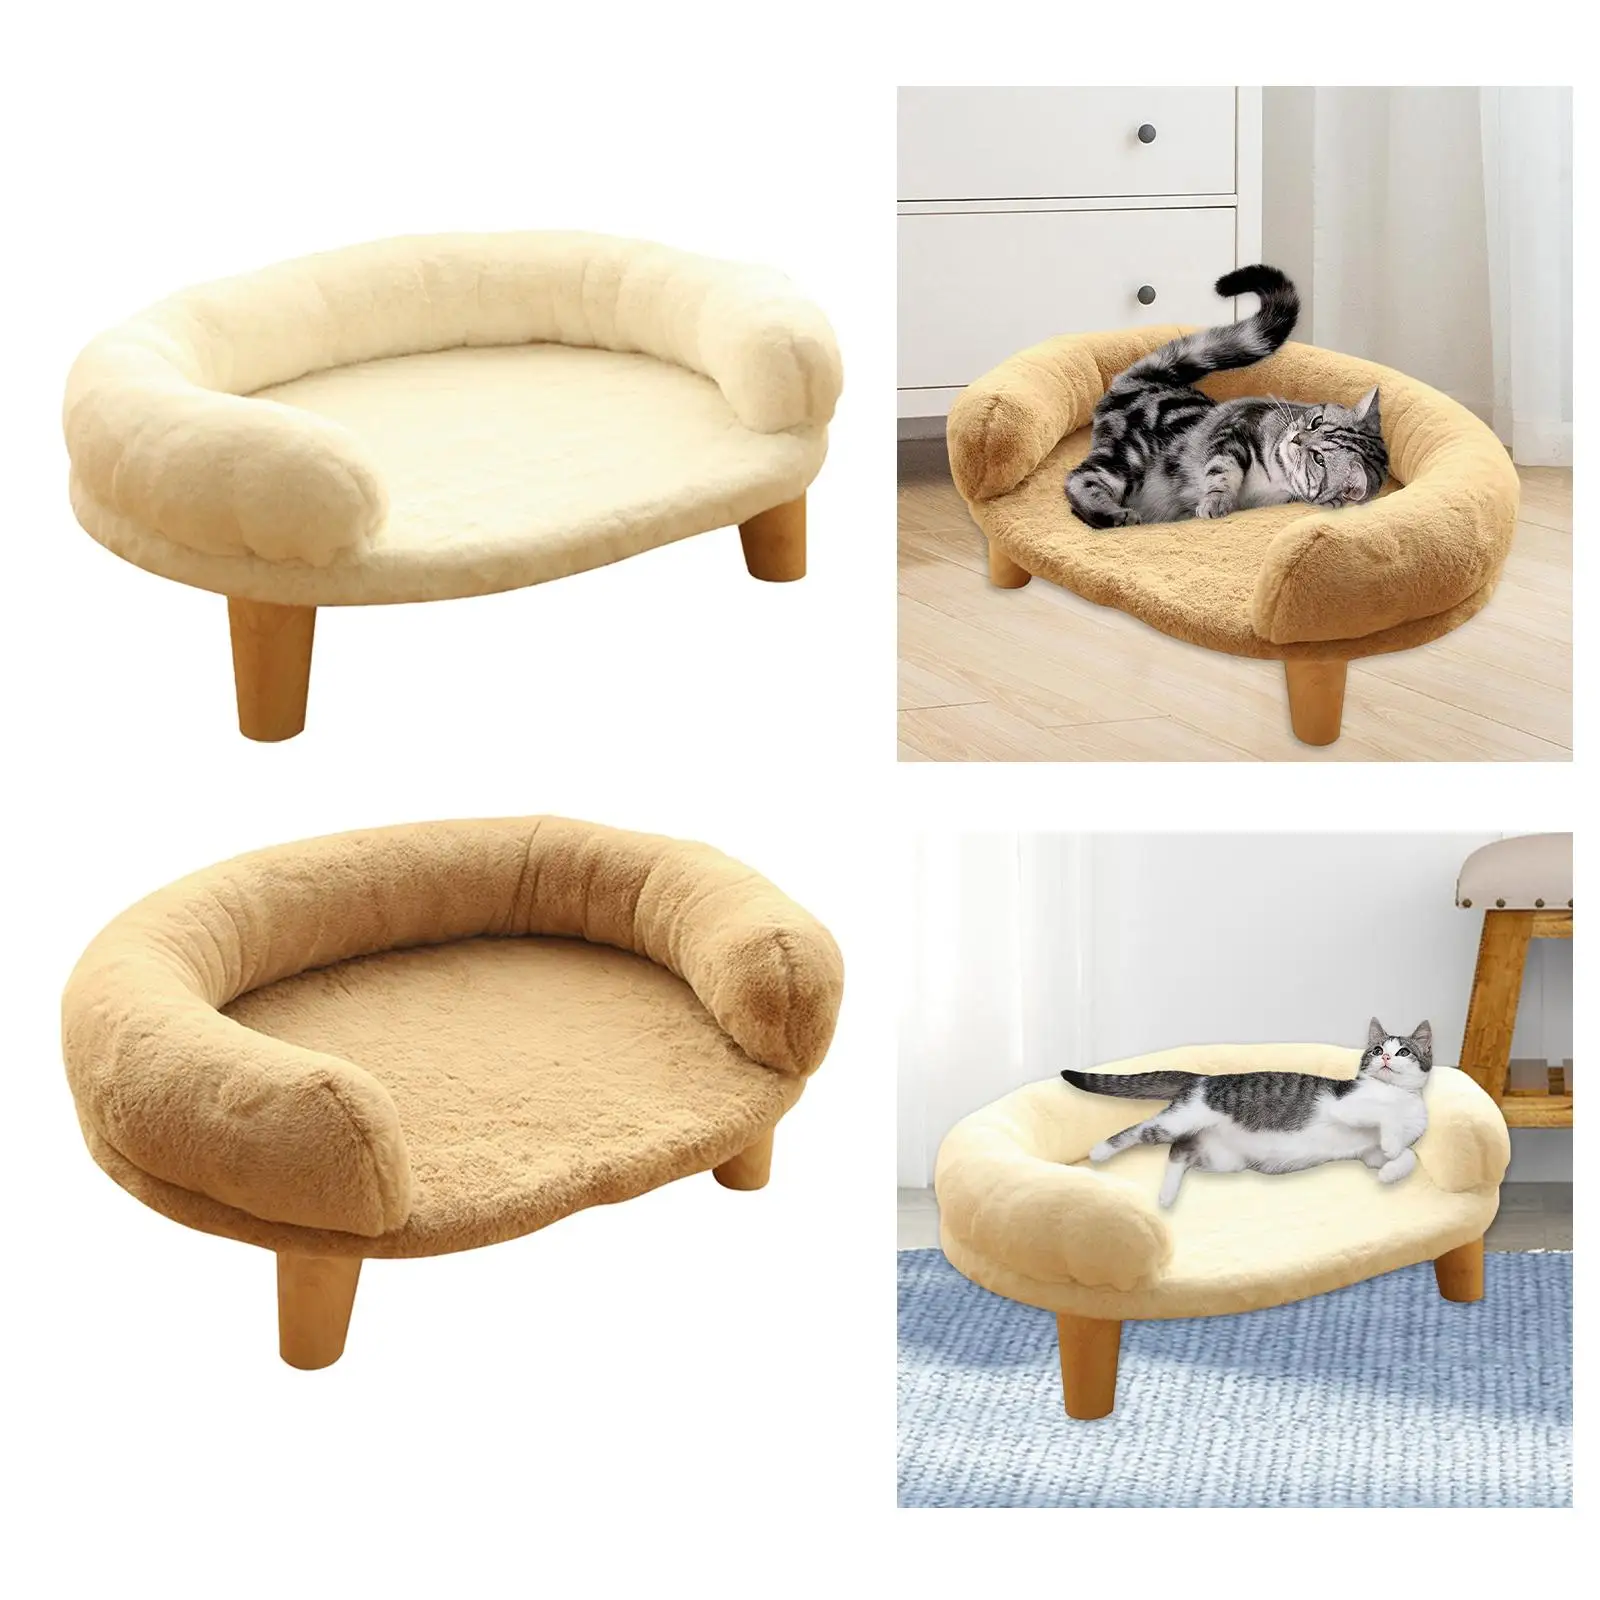 Cats Warm Couch Anti Slip Legs Soft Pet Bed for Puppy Small Medium Dog Kitty